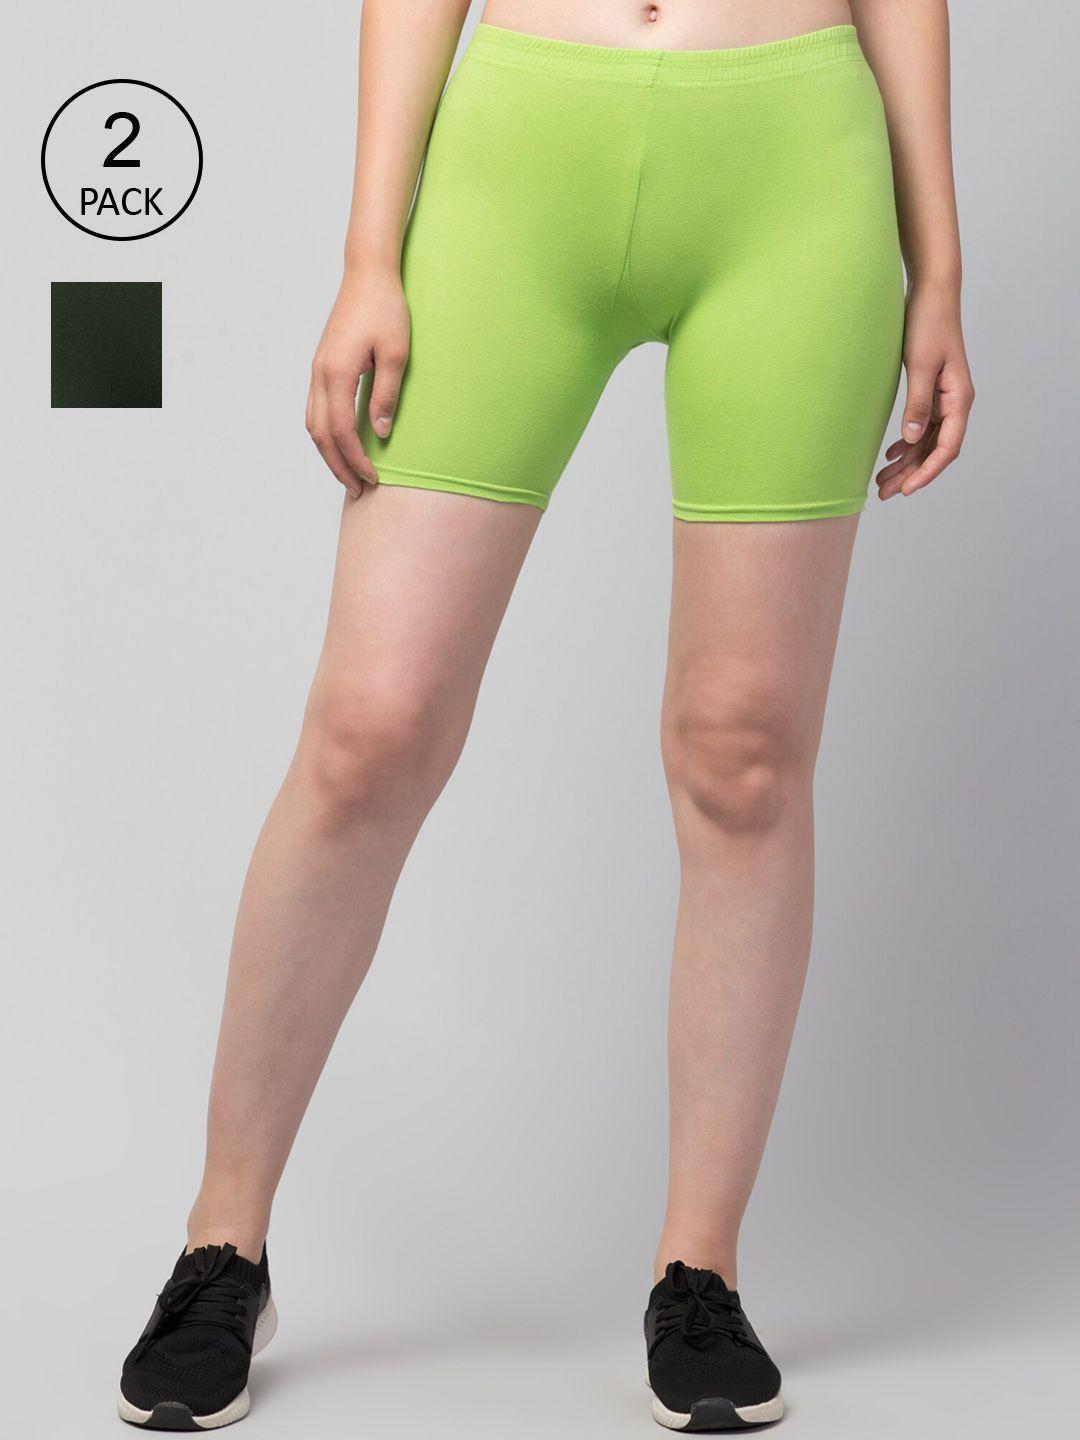 apraa-&-parma-pack-of-2-women-slim-fit-cotton-cycling-sports-shorts